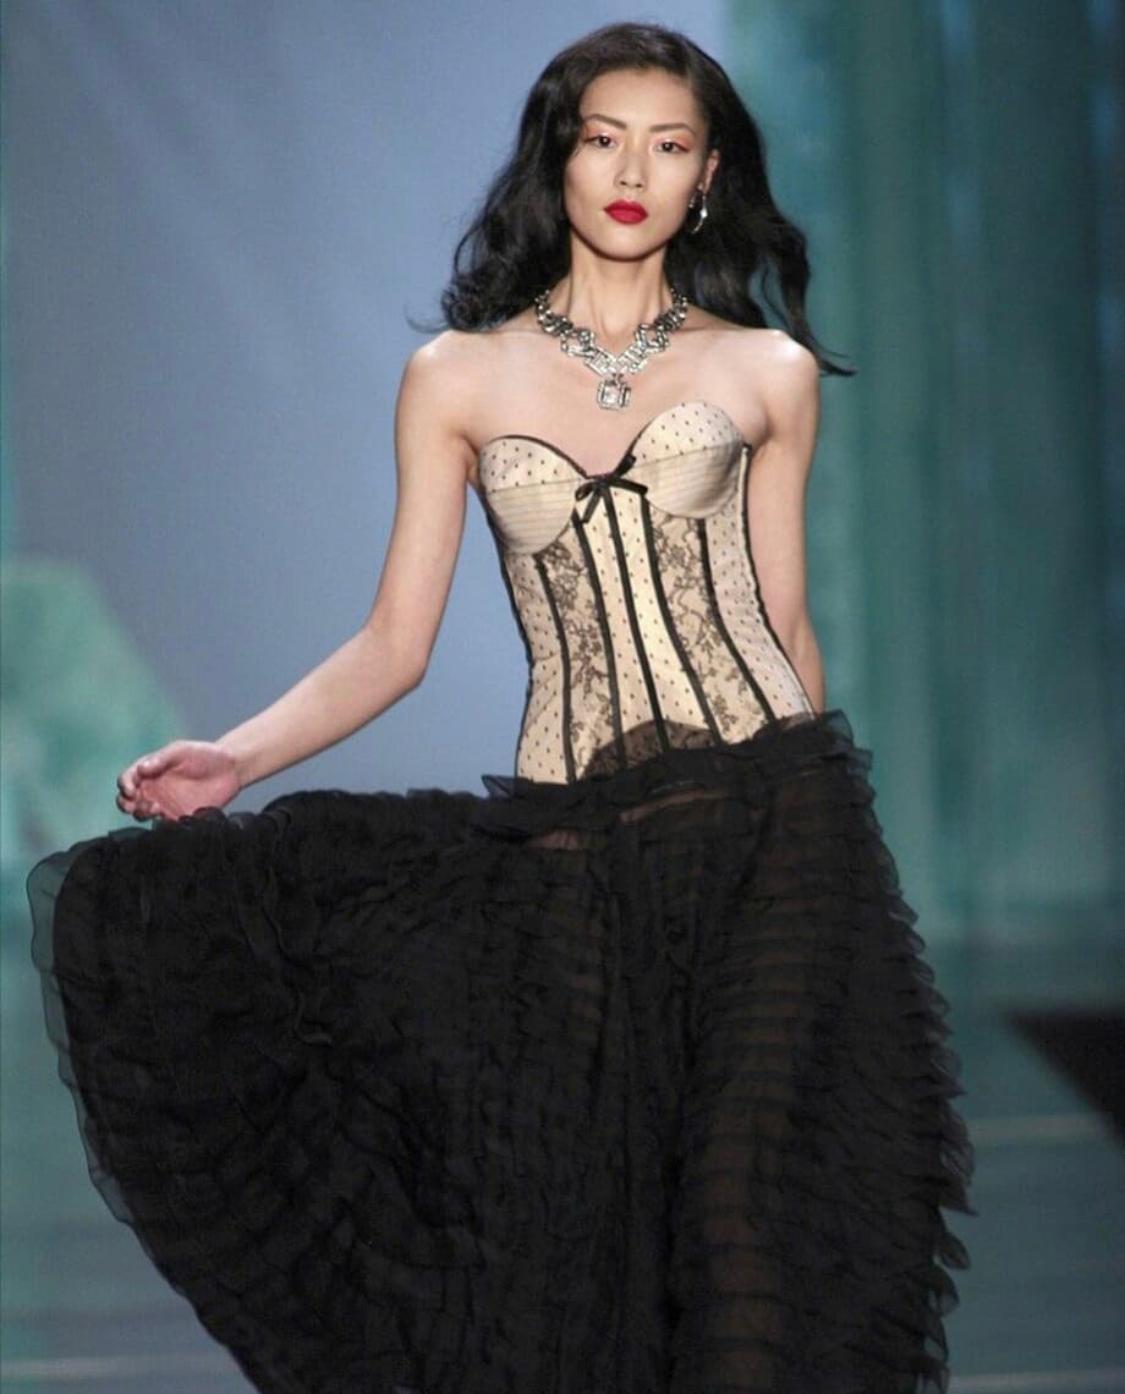 A fabulously cool gunmetal tone Vintage Dior Statement Art Deco Style Necklace created by John Galliano for the 2010 Spring Sumer Haute Couture collection.  The Chinese super model Liu Wen is captured in iconic footage on the runway for this